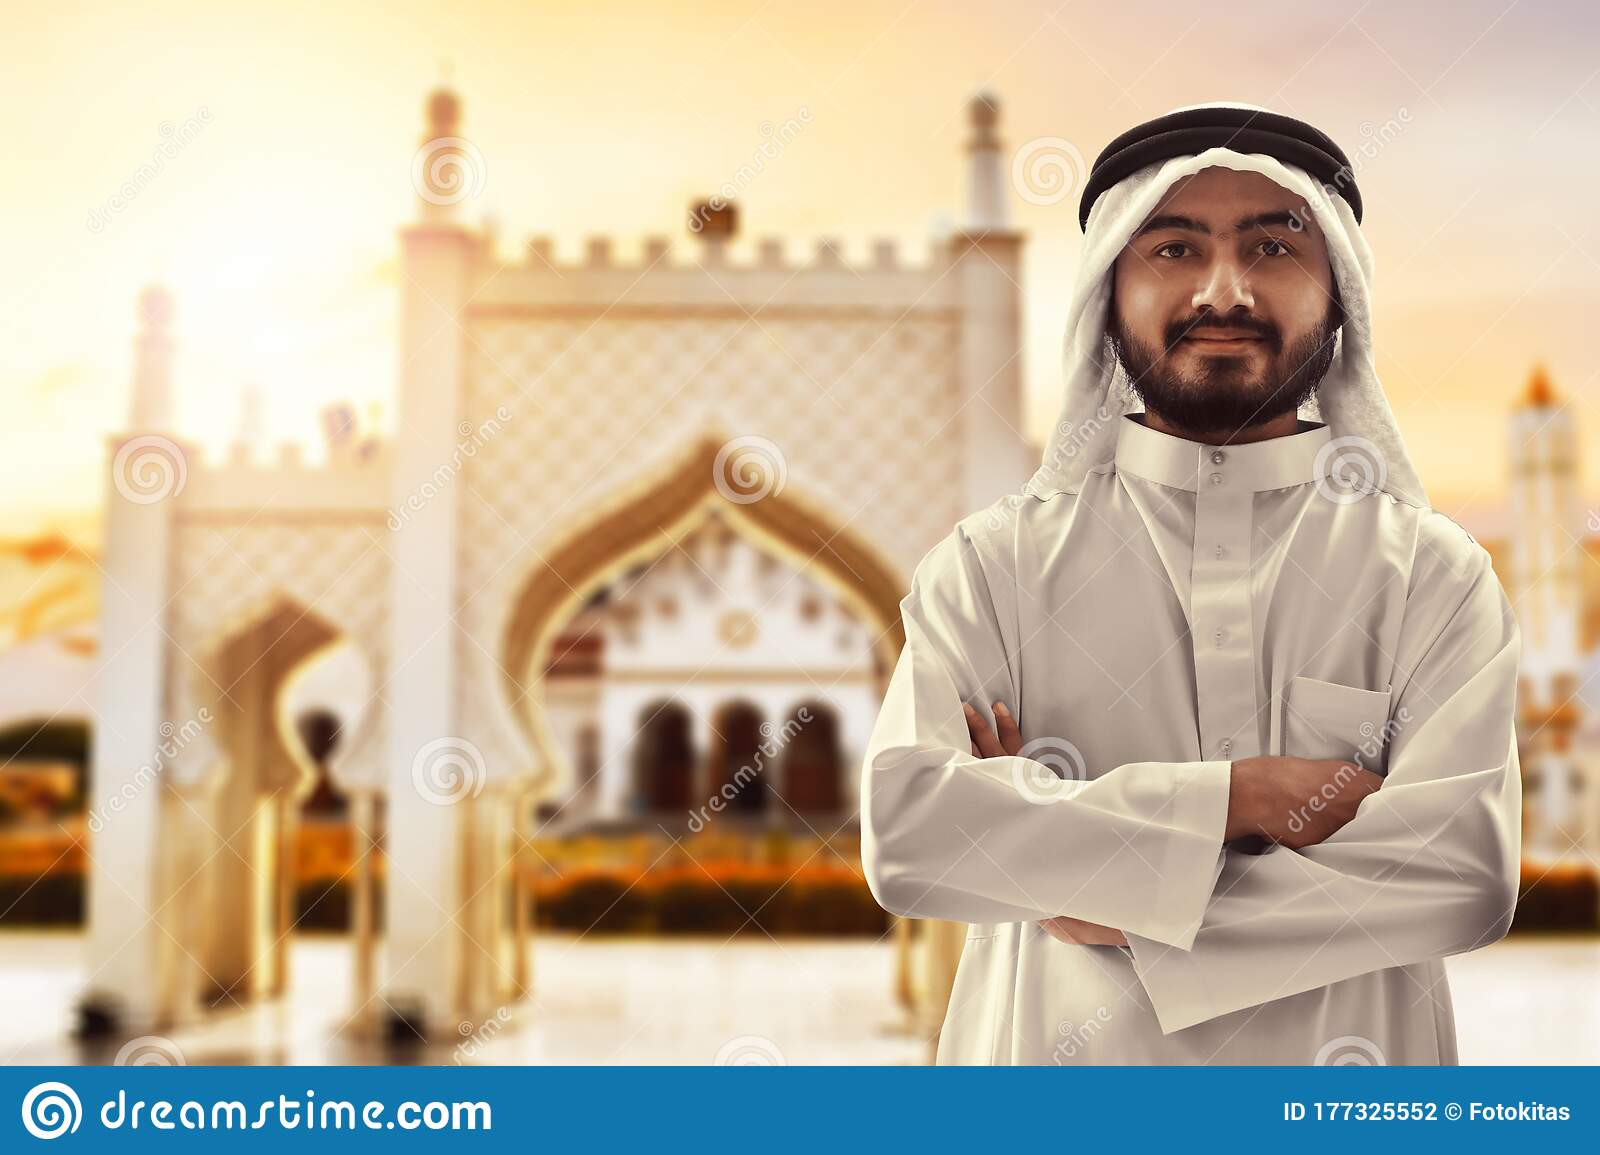 Portrait Of Young Arab Man At Baiturrahman Grand Mosque Banda Aceh Stock Photo Image Of Architecture Background 177325552